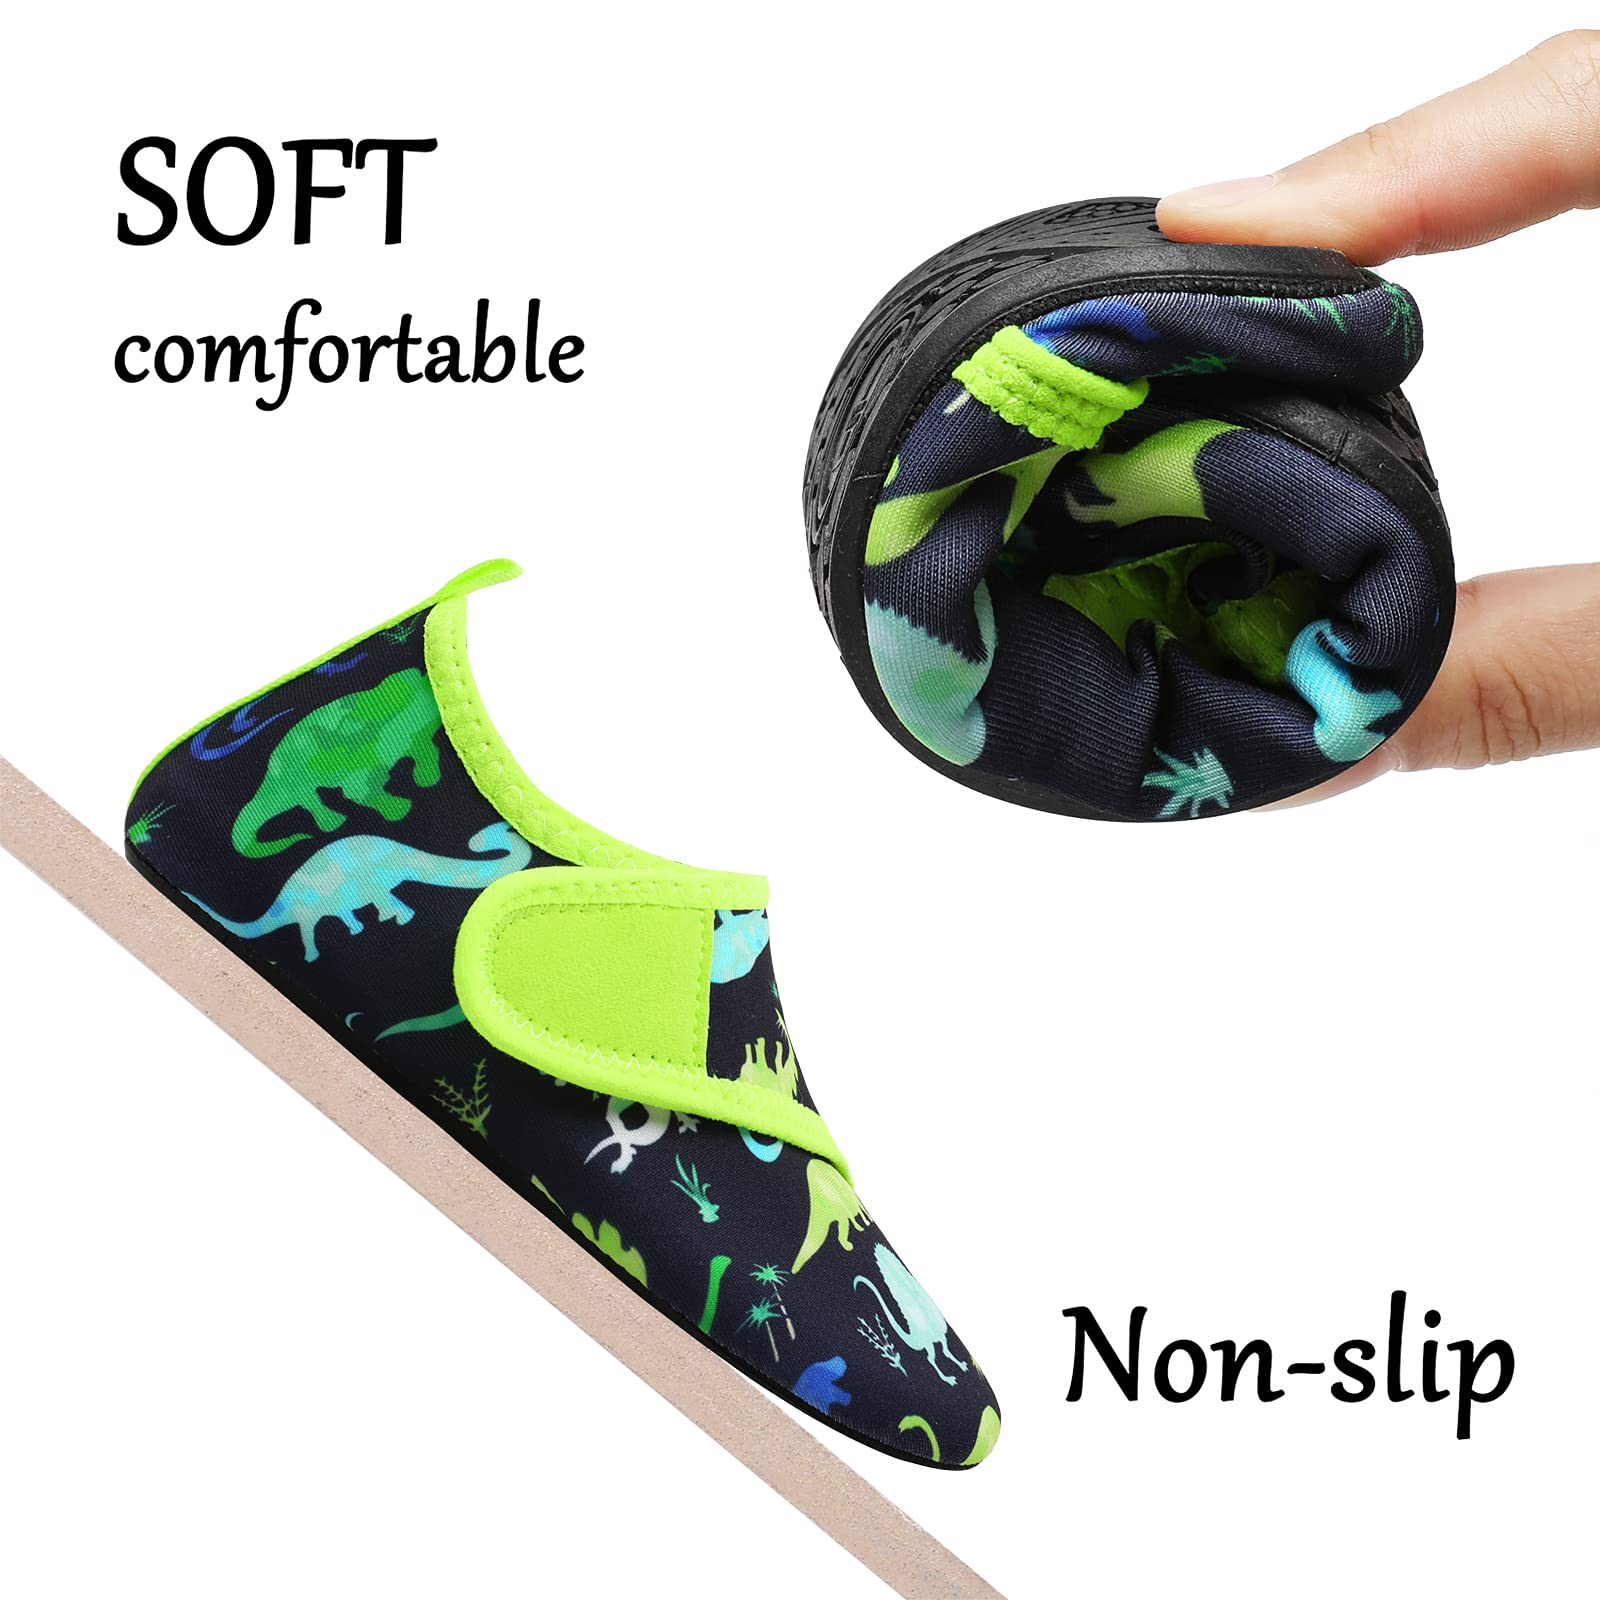 JOINFREE Kids Boys and Girls Swim Water Shoes Toddler Quick Dry Aqua Socks Barefoot Skin Shoes for Beach Sports